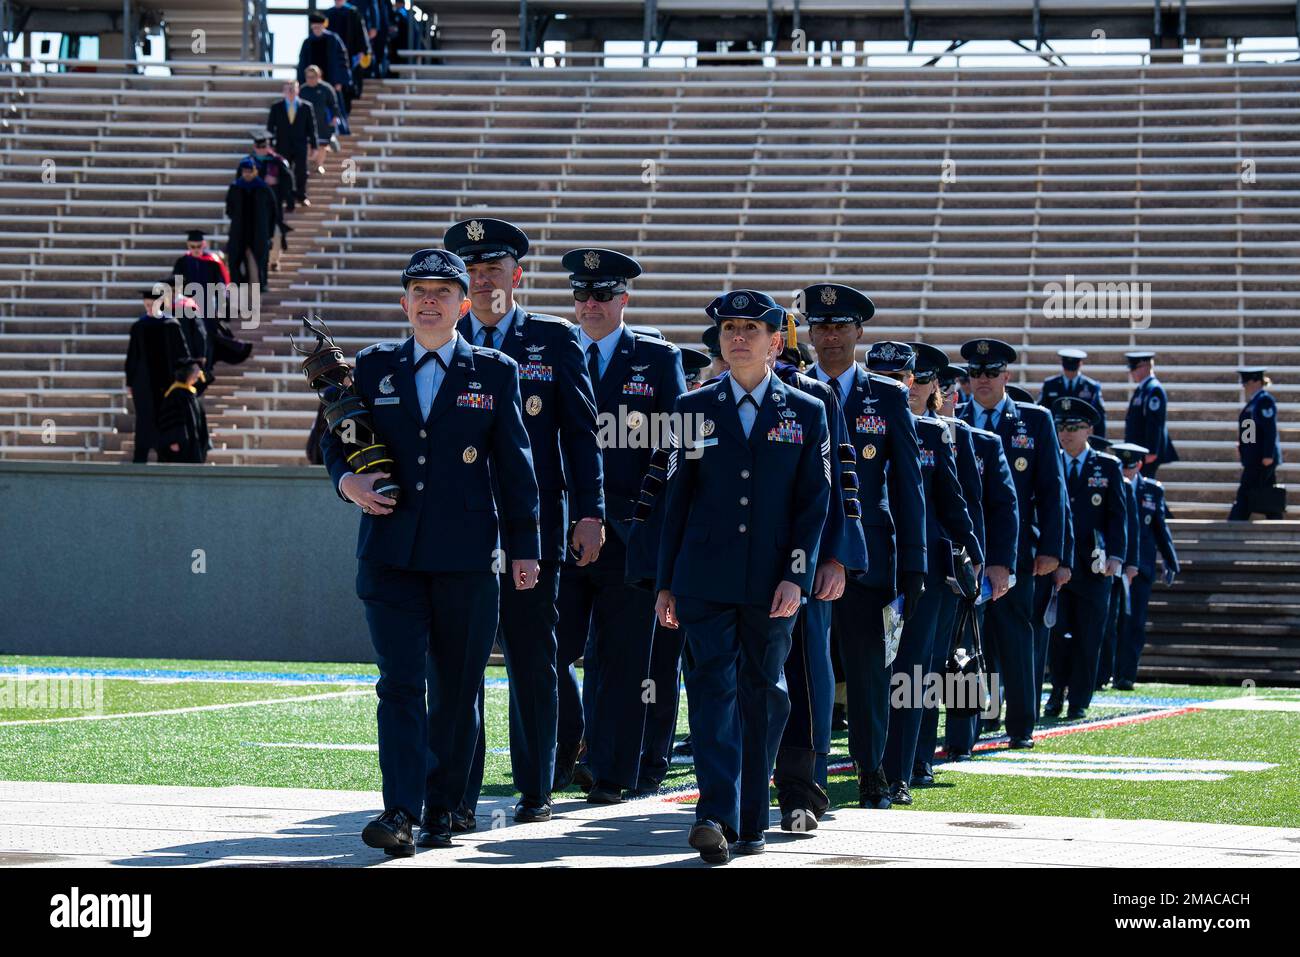 U.S. Air Force Academy -- Brigadier General Linell A. Letendre, Dean of the Faculty, leads her staff into Falcon stadium for the Class of 2022 Graduation Ceremony at the Air Force Academy in Colorado Springs, Colo., May 25, 2022. Nine-hundred-seventy cadets crossed the stage to become the Air Force/Space Force’s newest second lieutenants. (U.S. Air Force photo/Joshua Armstrong) Stock Photo